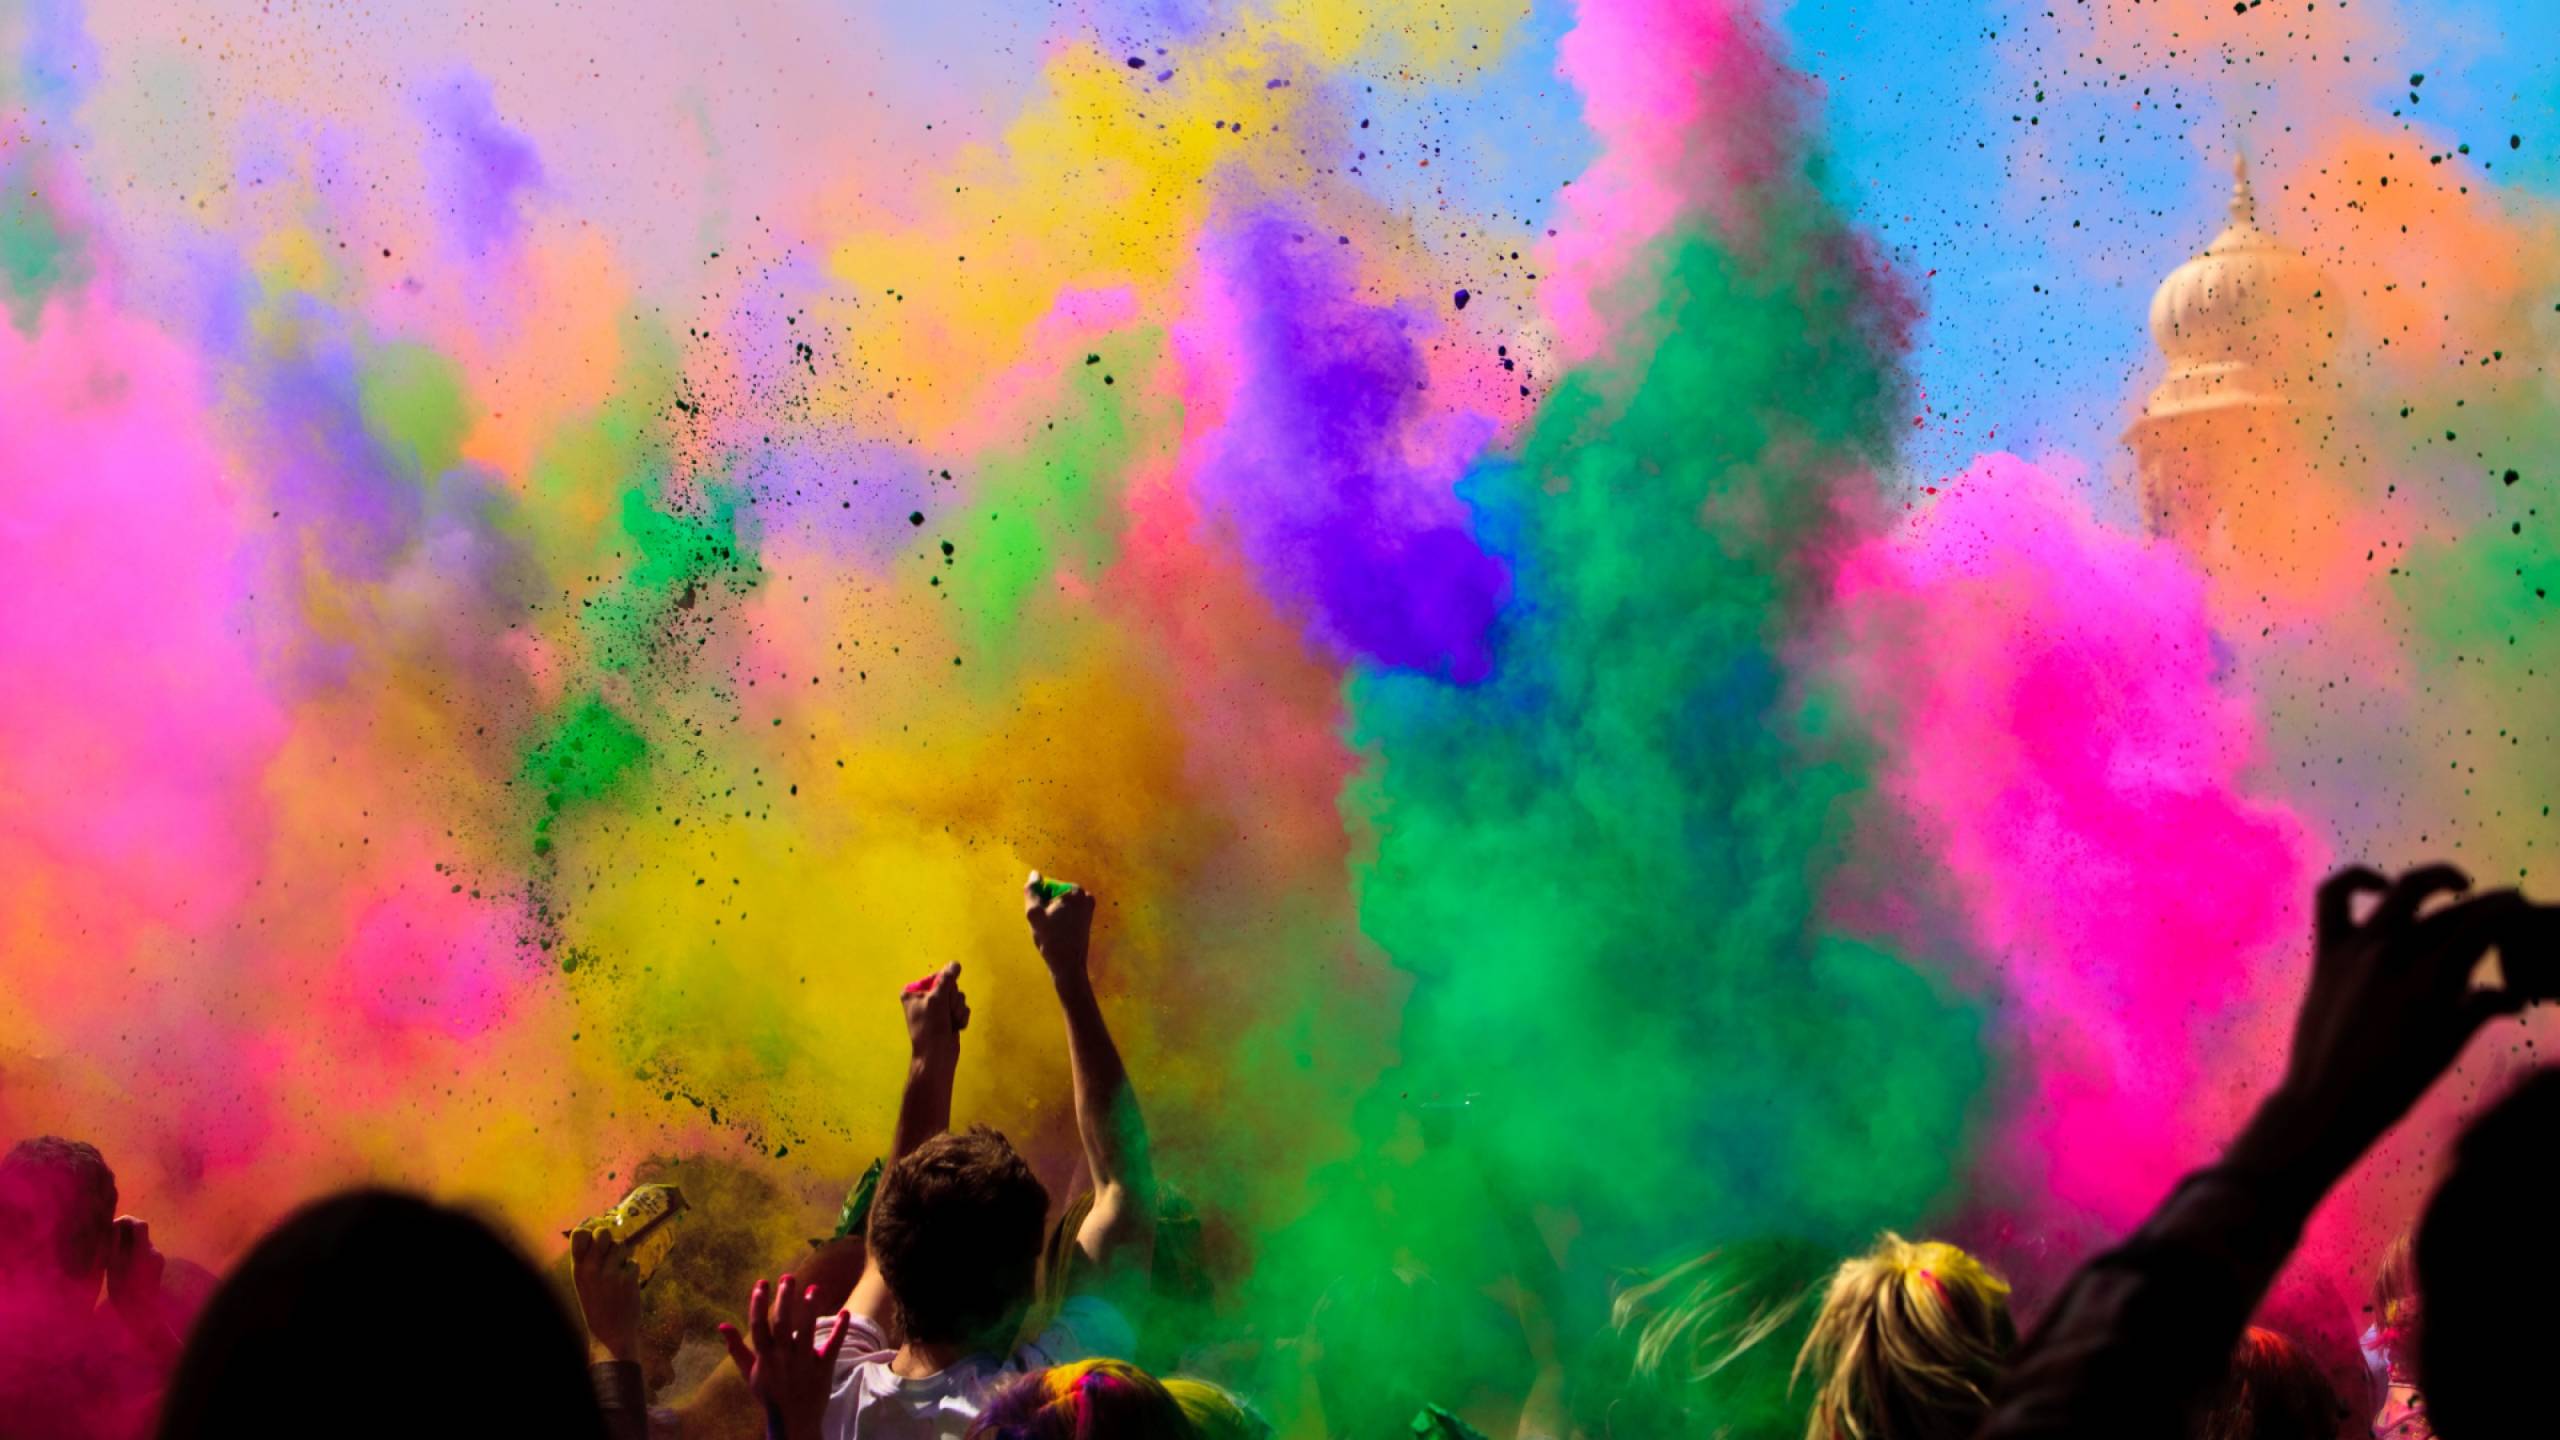 Clouds of colorful pigment powder drift over a cheering crowd as part of Holi celebrations.